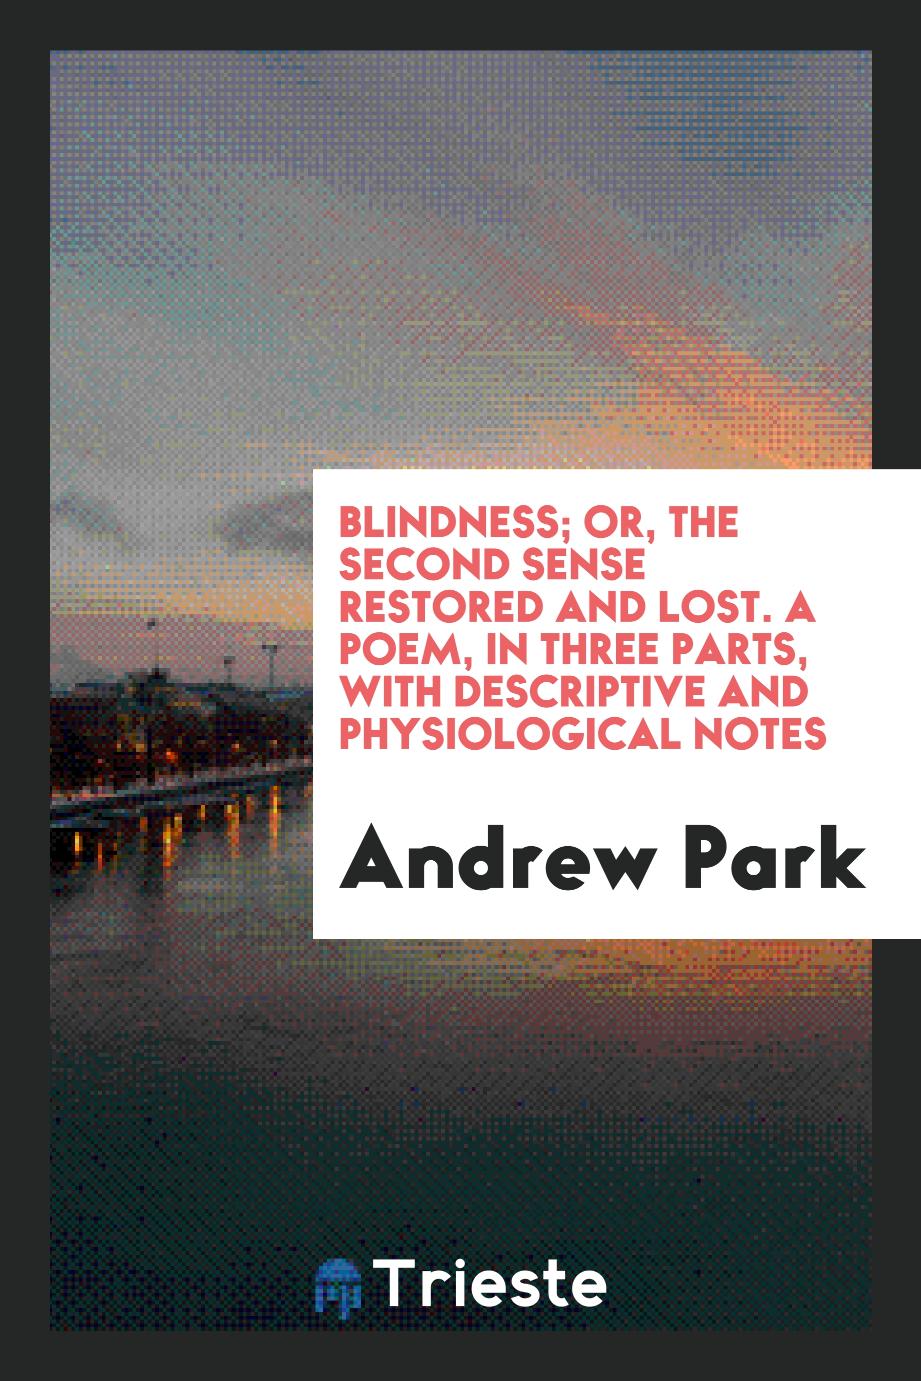 Blindness; Or, the Second Sense Restored and Lost. A Poem, in Three Parts, with Descriptive and Physiological Notes